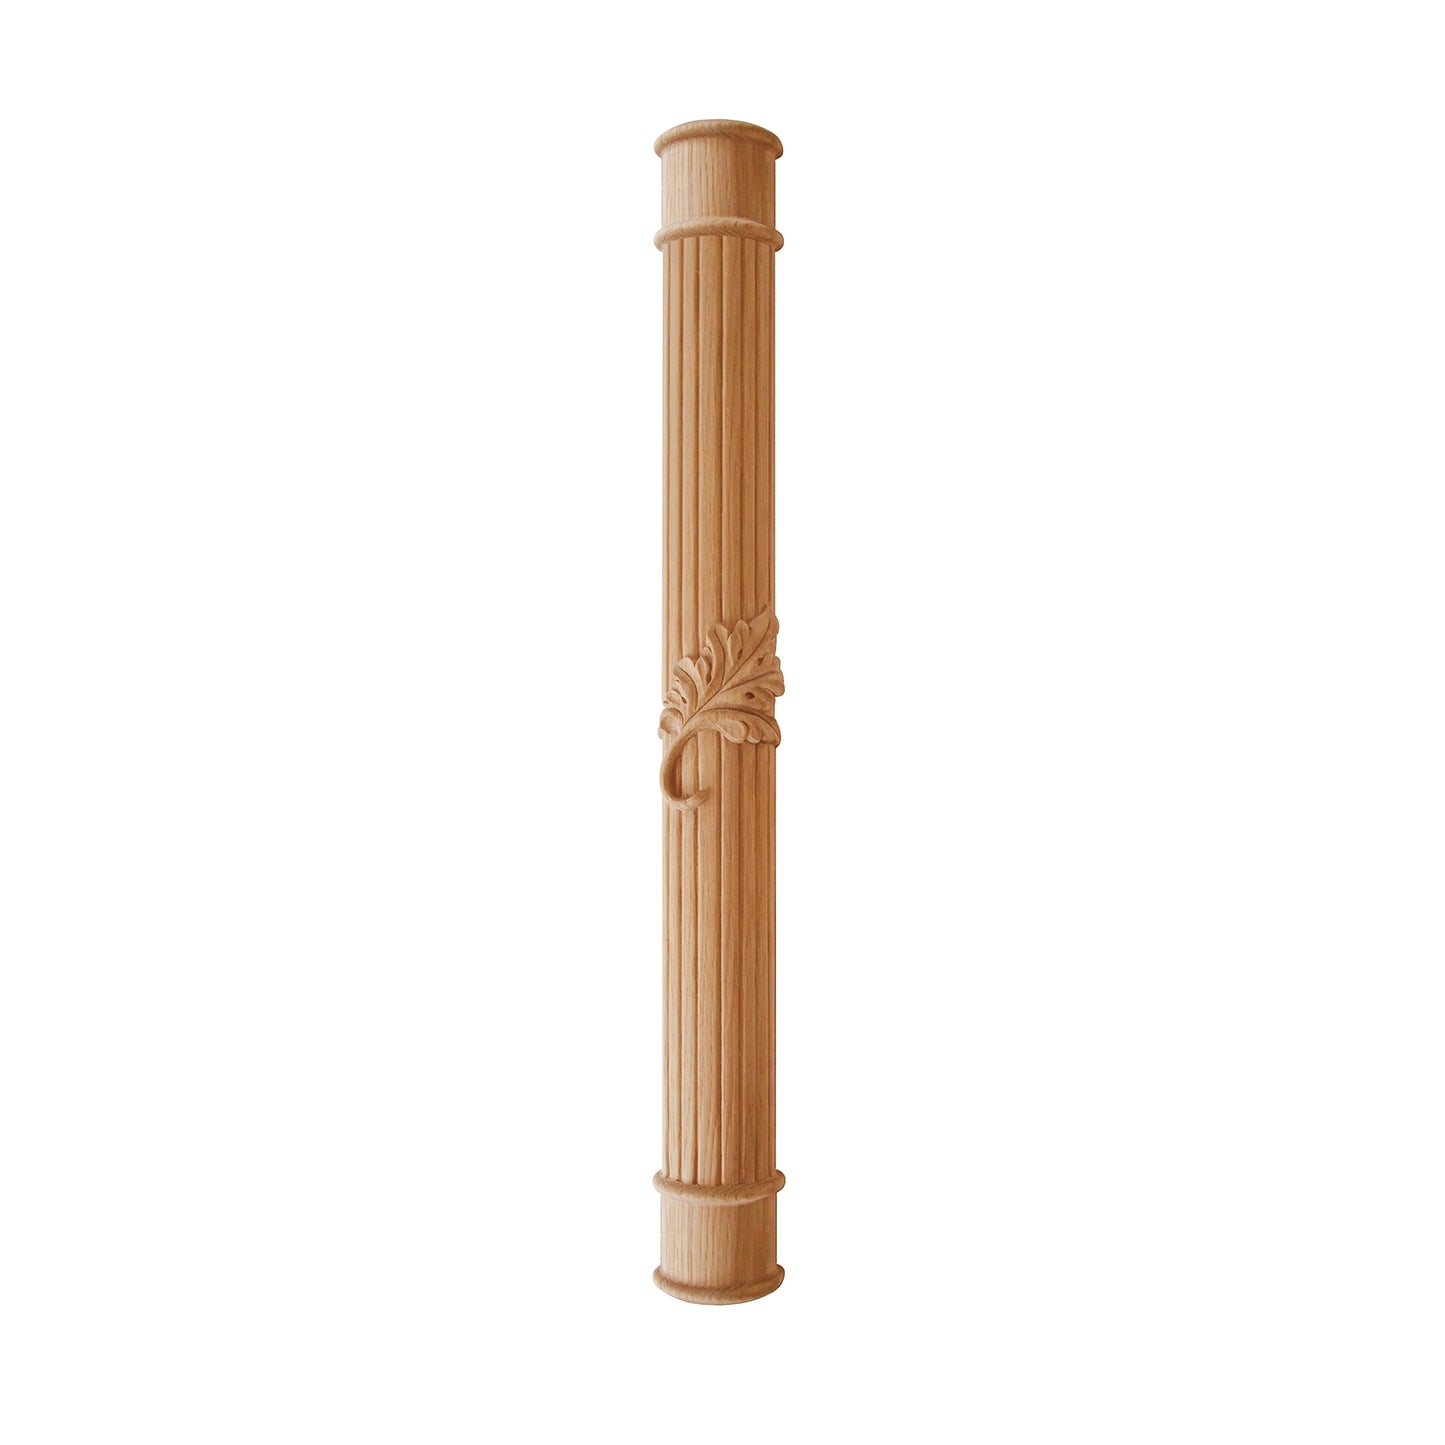 CLM-31 Single Leaf Carved 34-1/2"High Fluted Wood Columns, Available in 3-1/2", 5" Half & Full-round